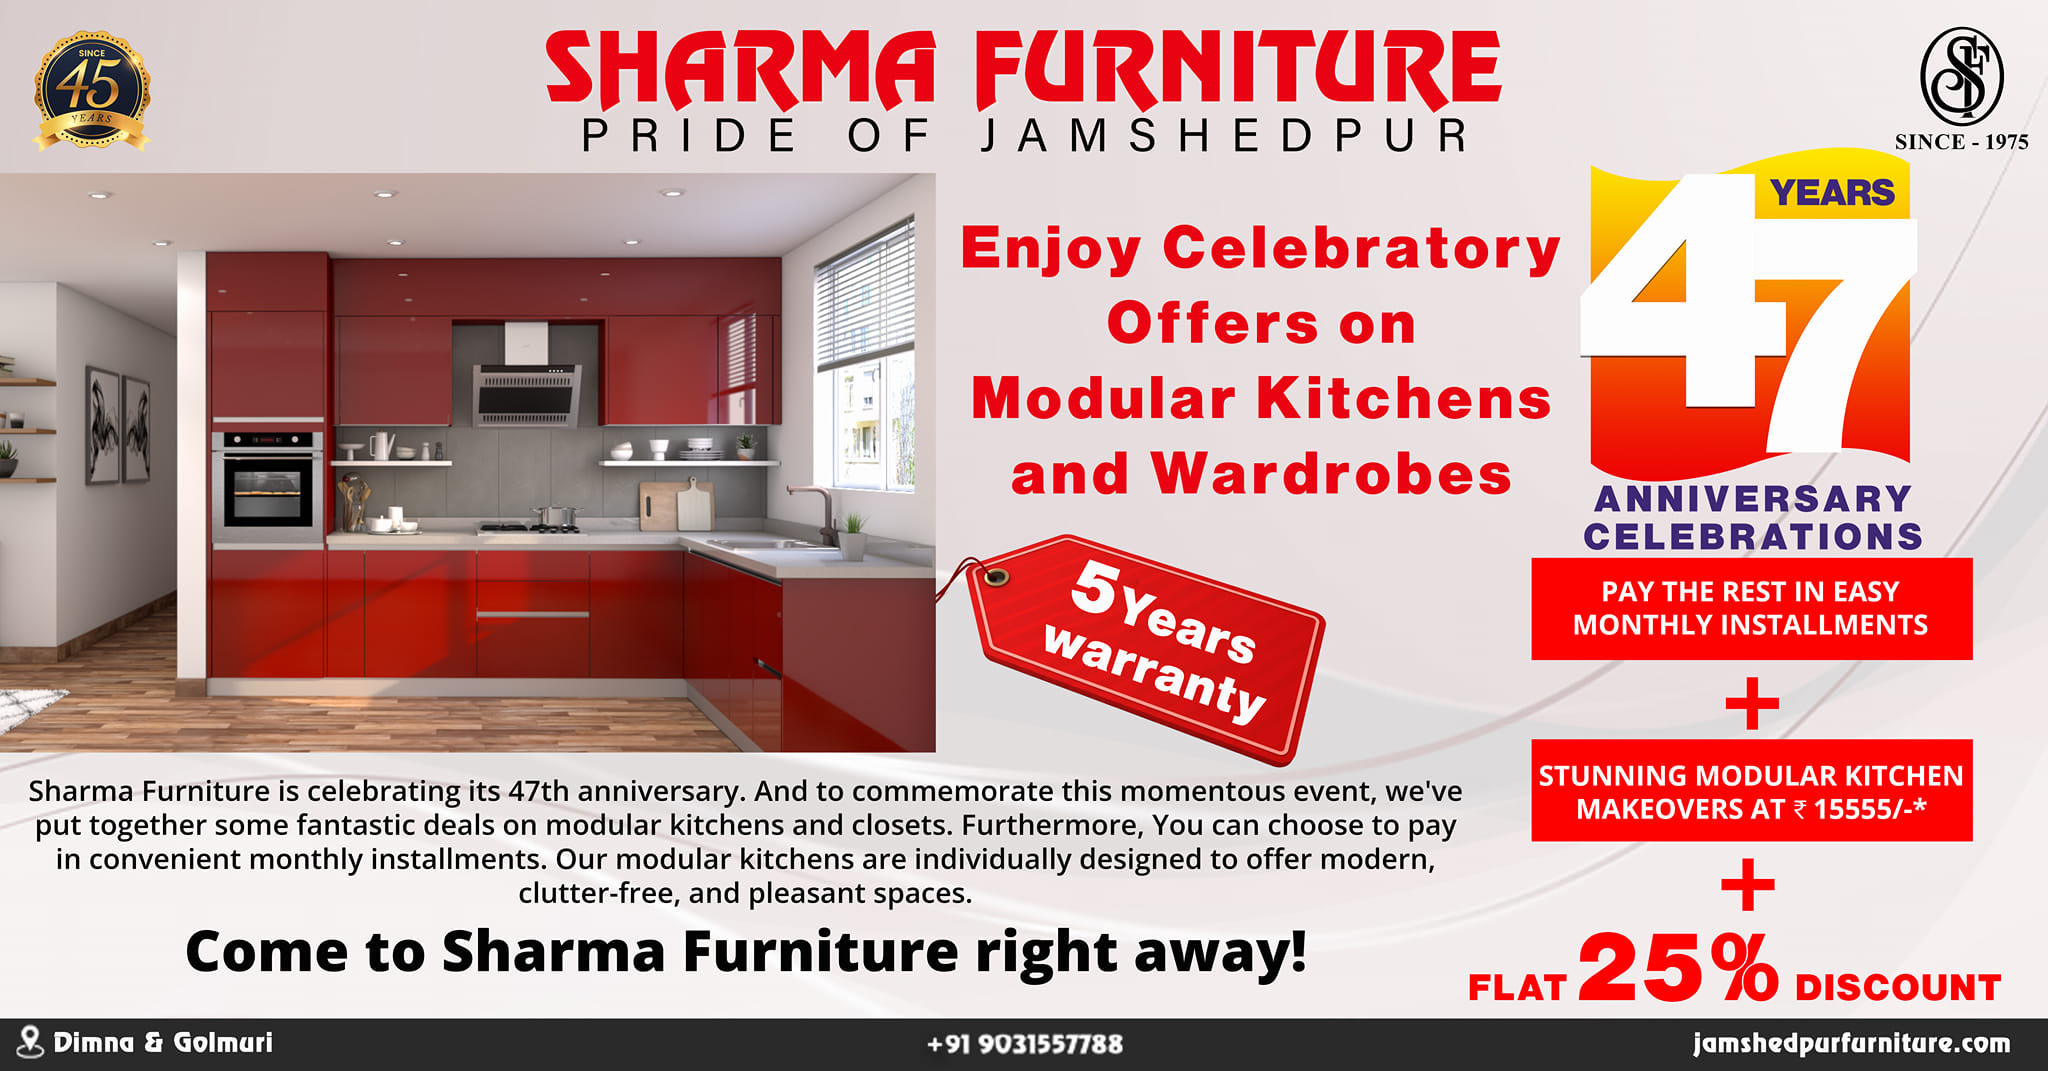 Sharma Furniture Home Décor: How to Create an Elegant Bohemian Look in Your Living Room